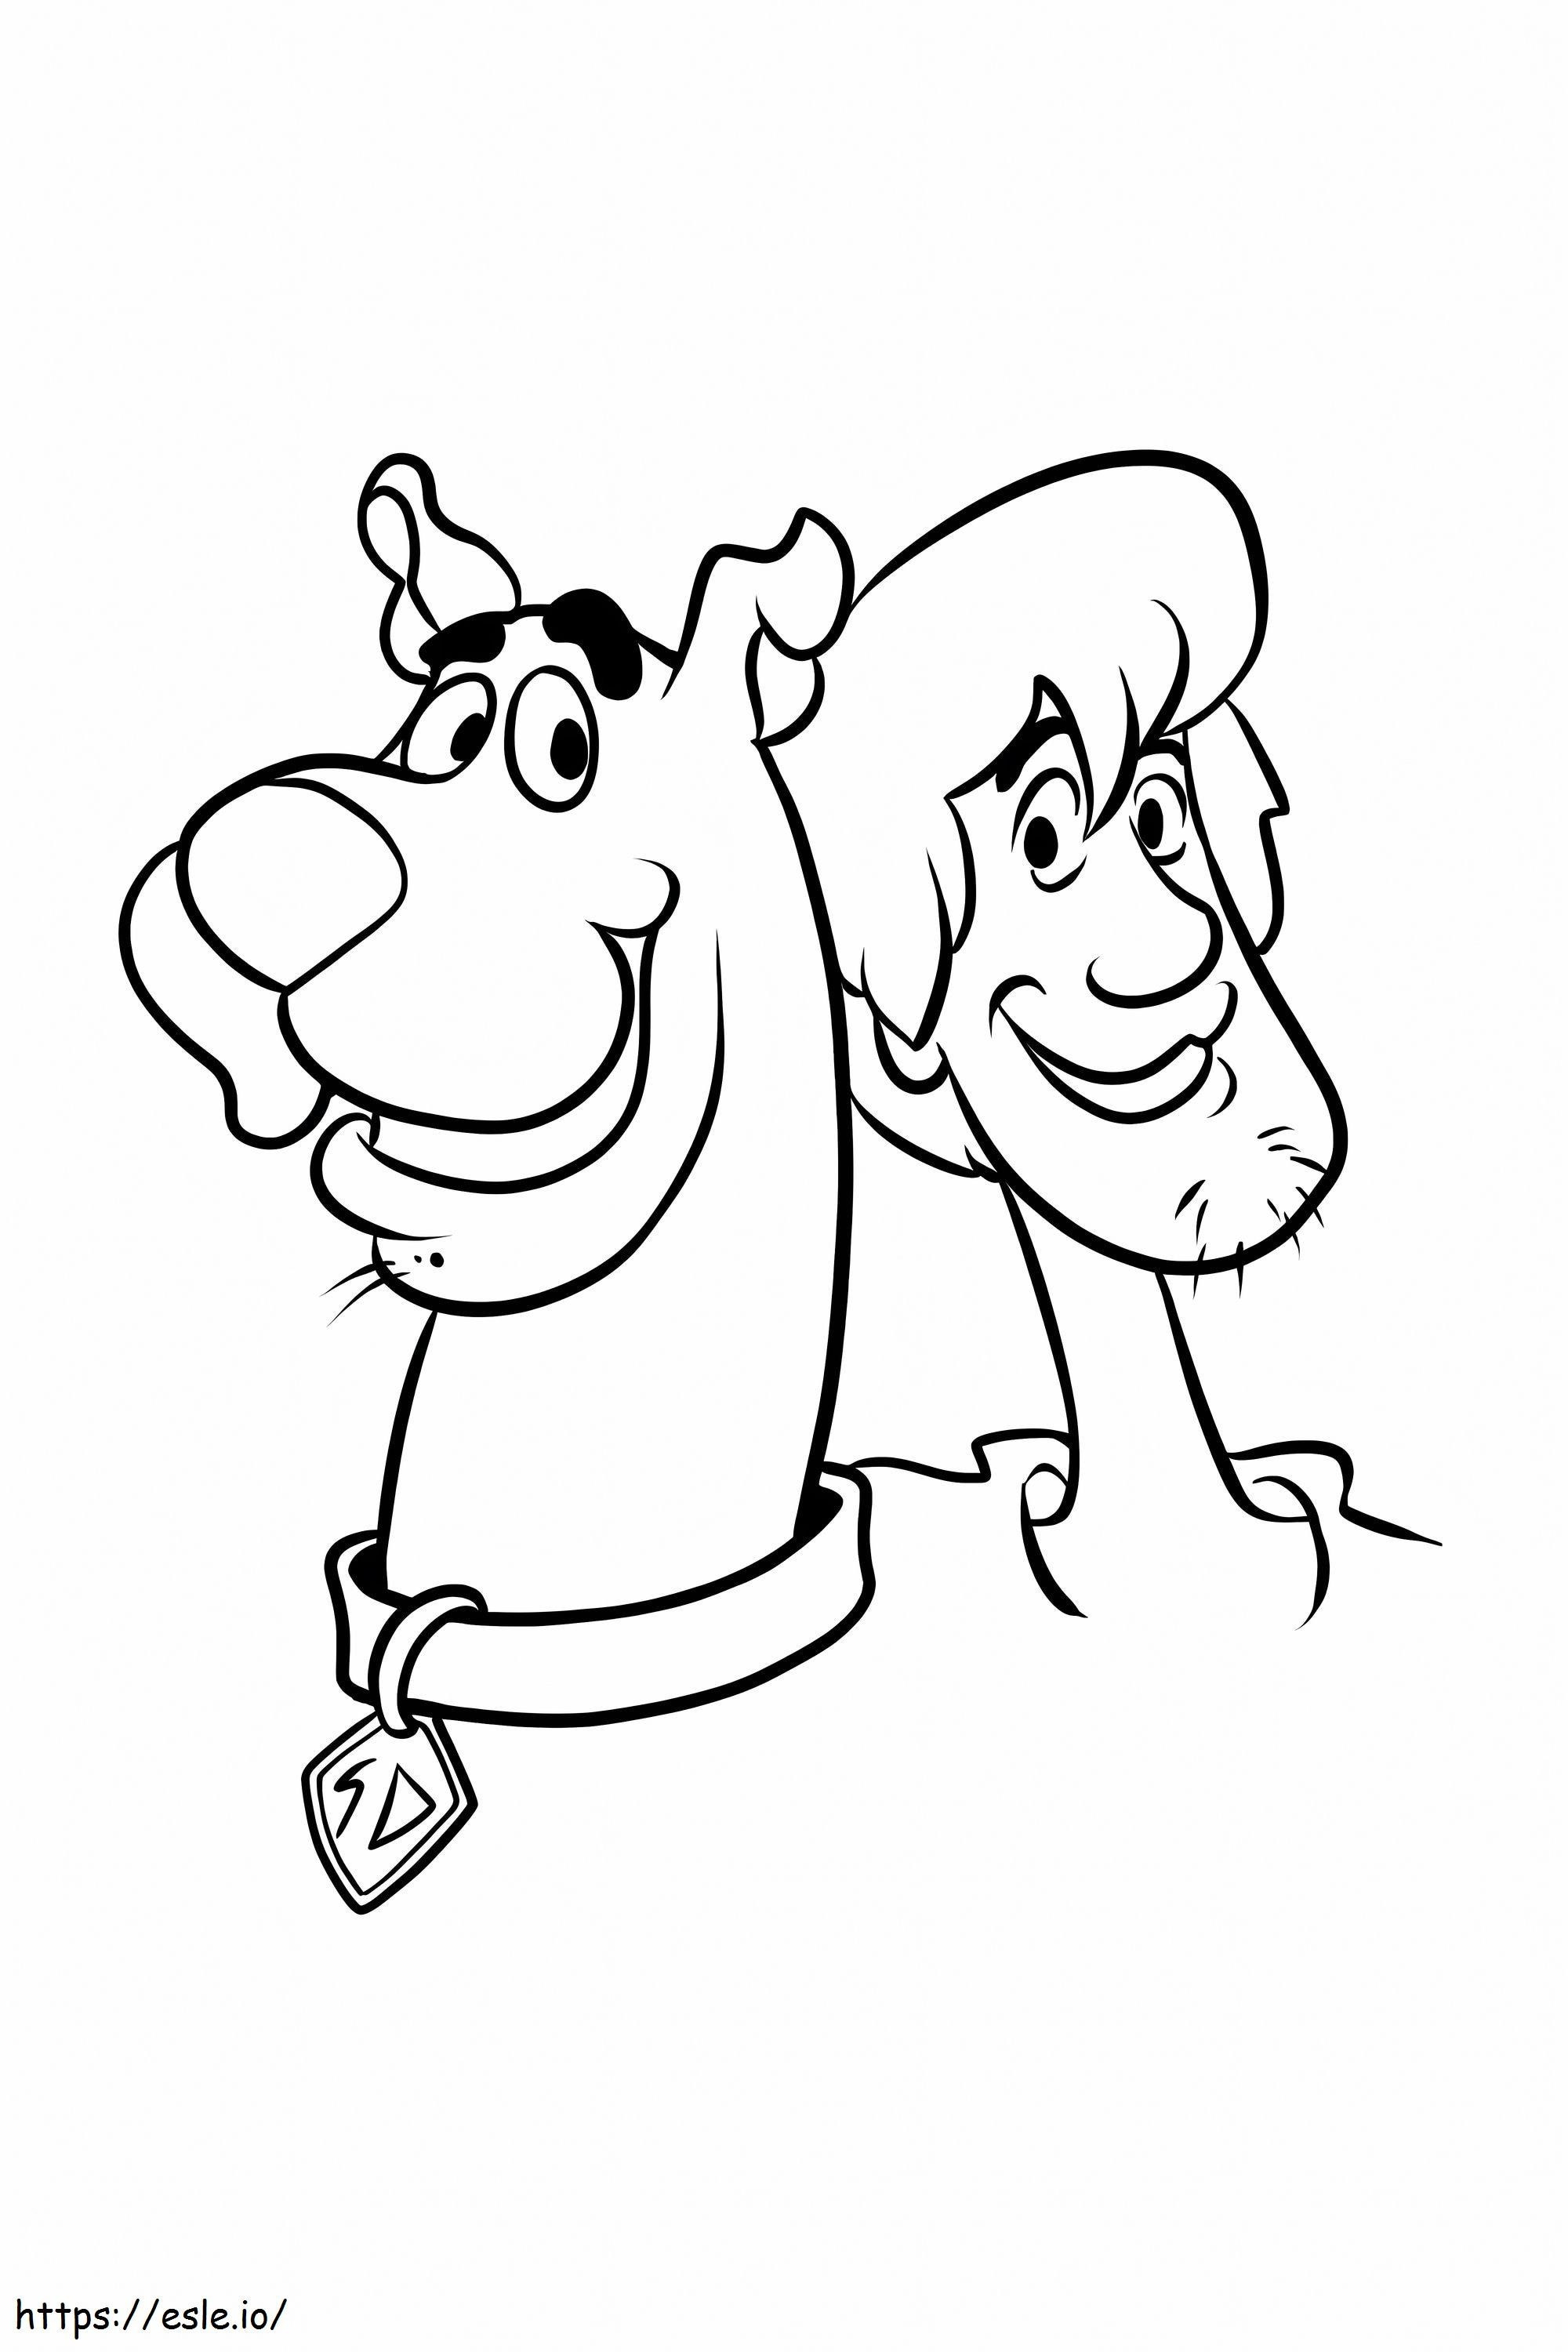 Shaggy Rogers And Scooby Doo Head coloring page